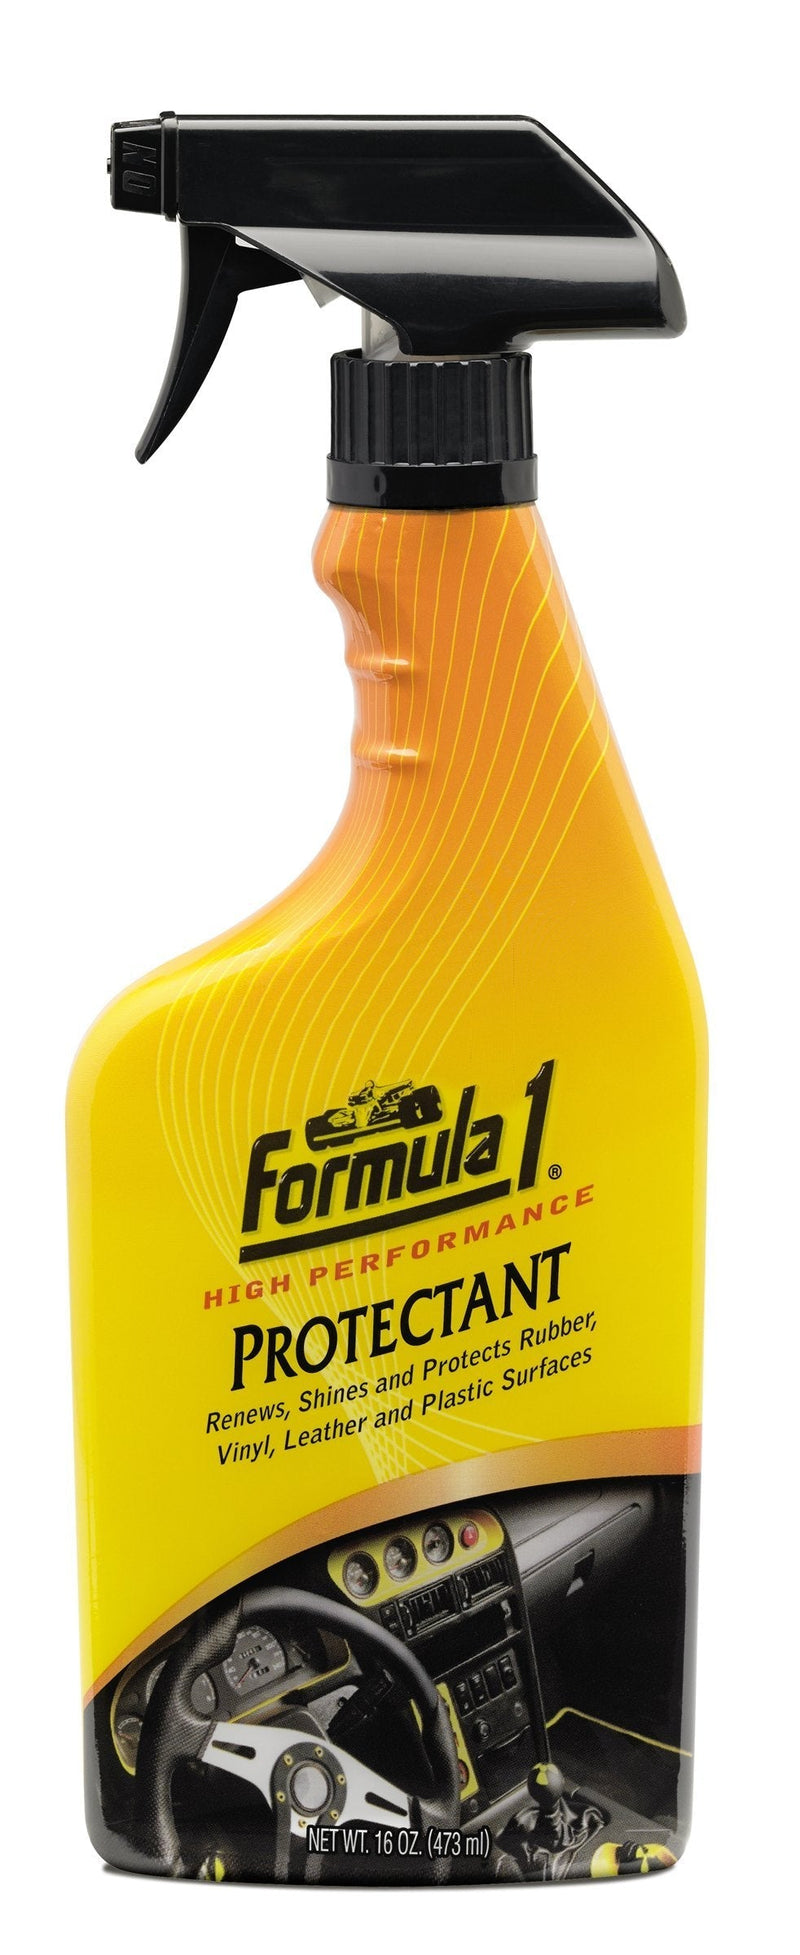  [AUSTRALIA] - Formula 1 High Performance Protectant – Cleans Car Interiors and Exteriors – Shines and Protects 16 oz.